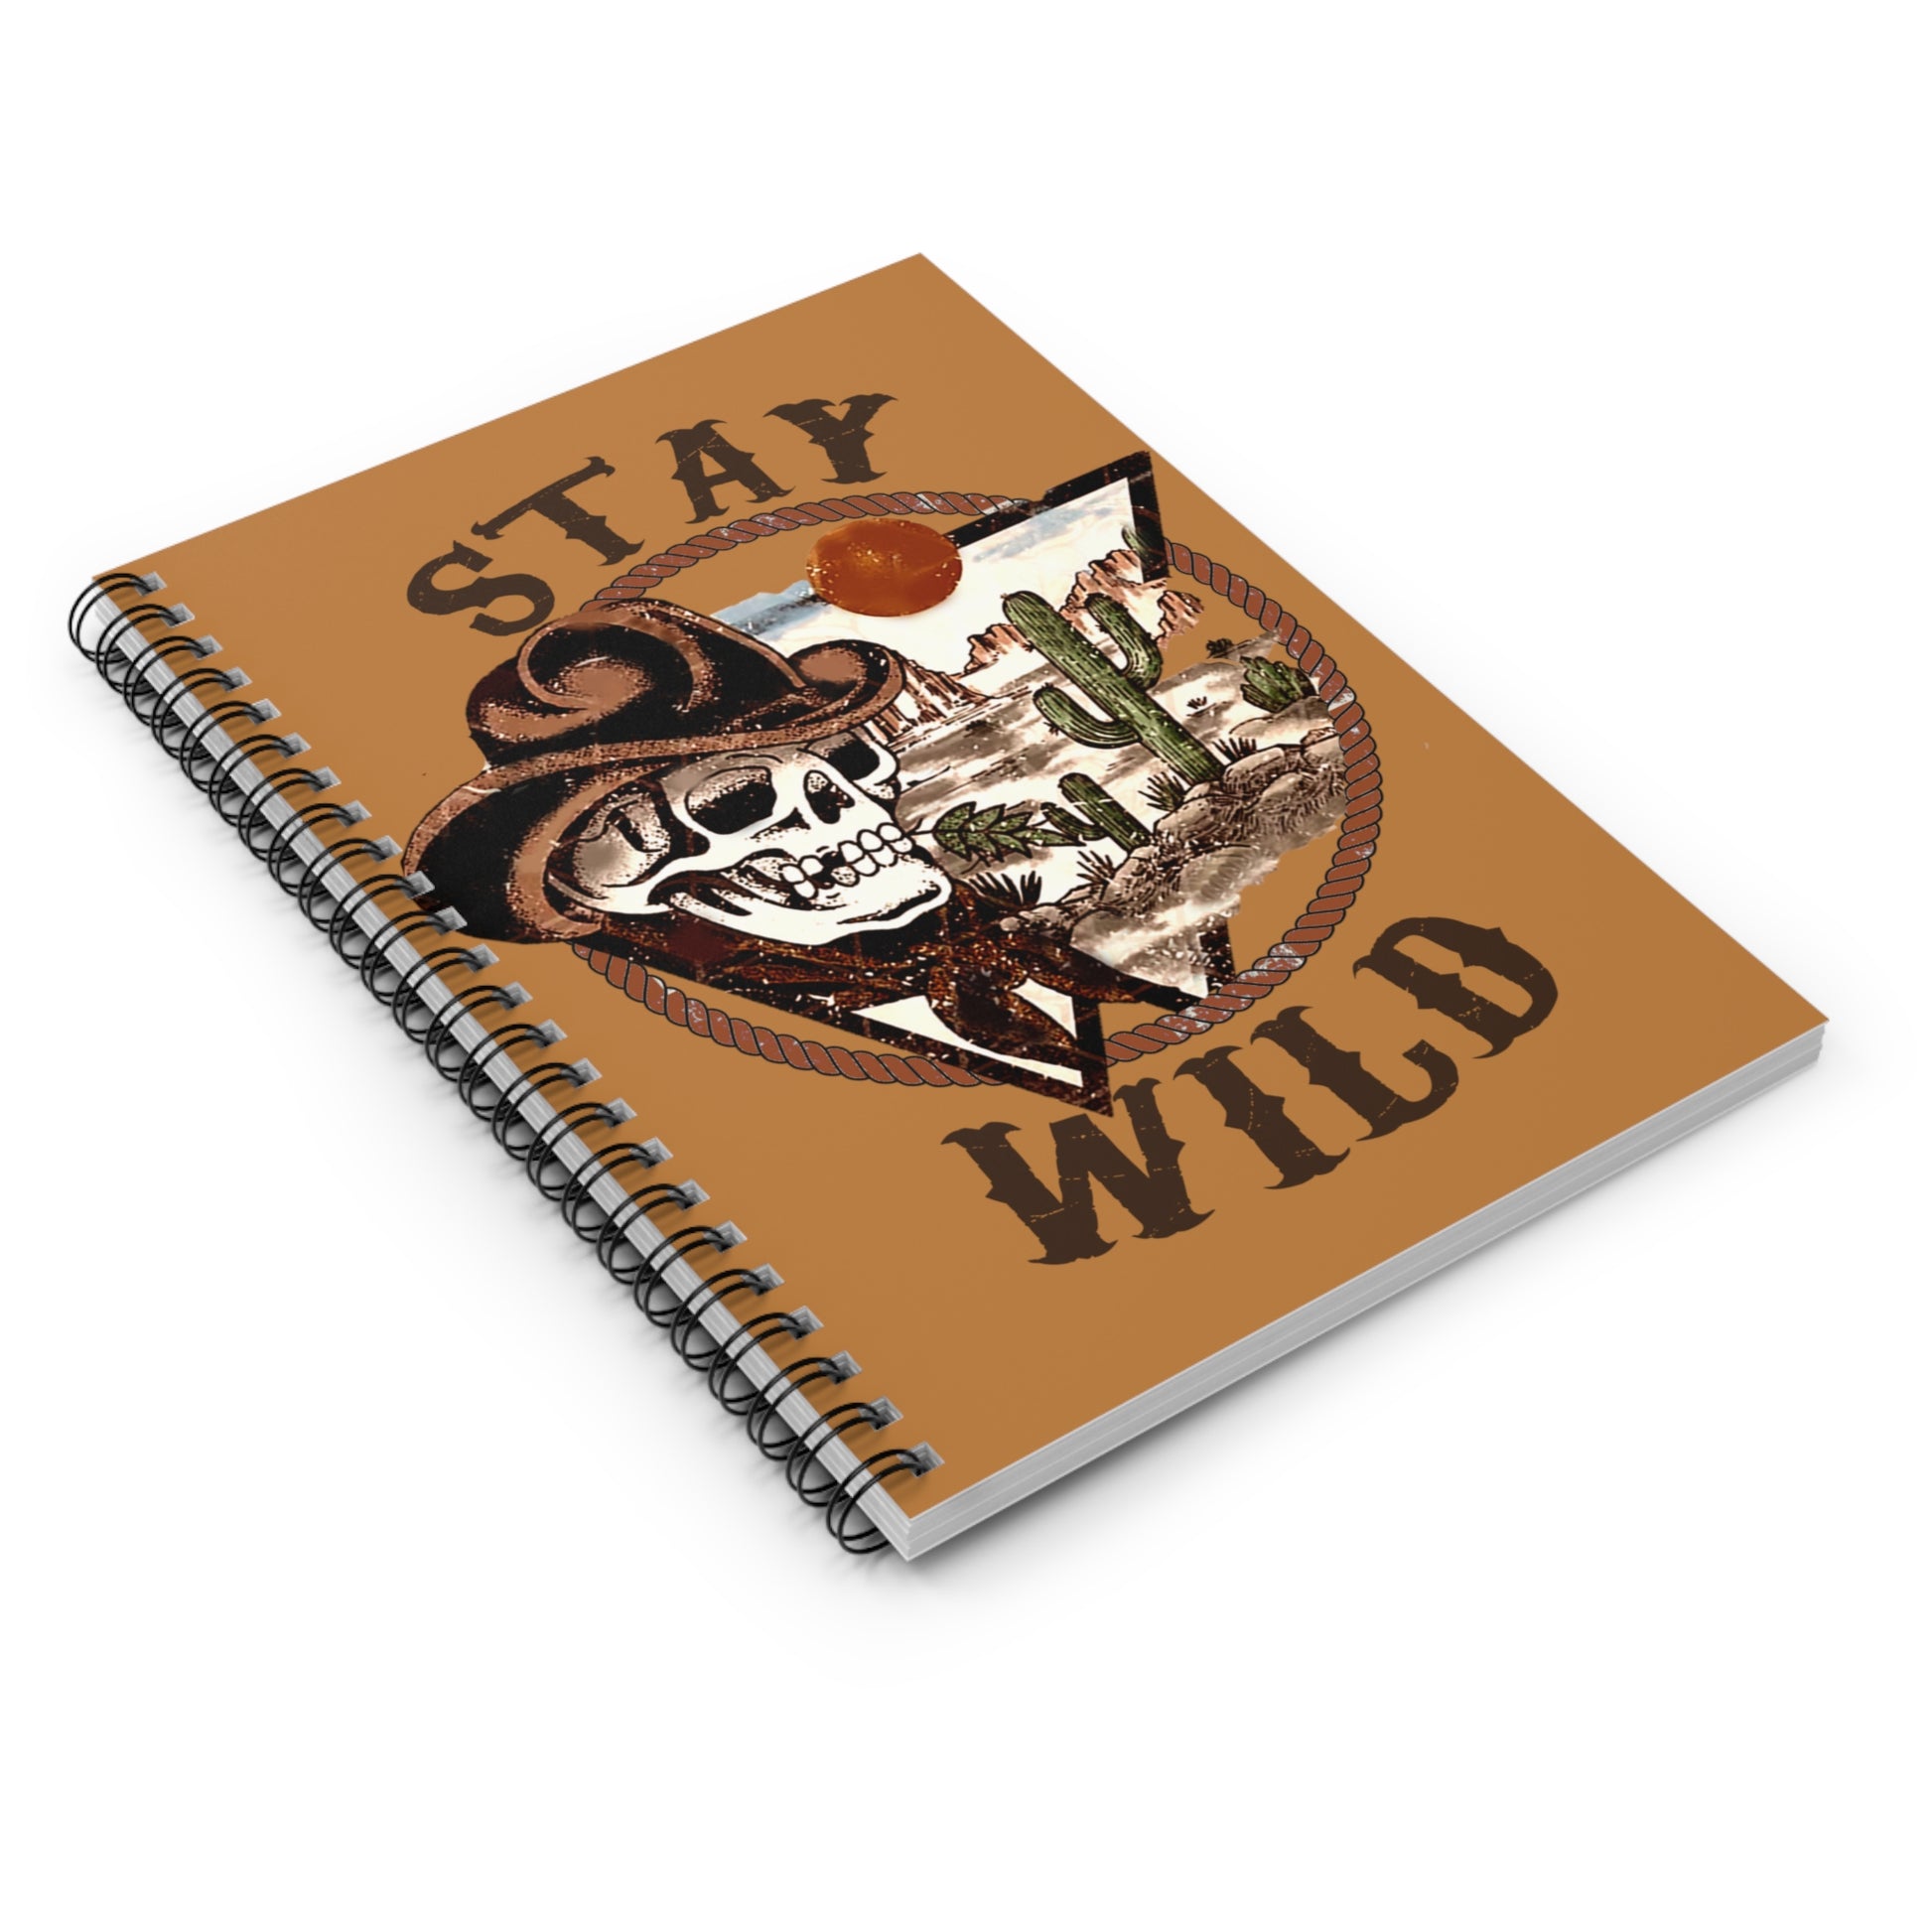 Stay Wild: Spiral Notebook - Log Books - Journals - Diaries - and More Custom Printed by TheGlassyLass.com